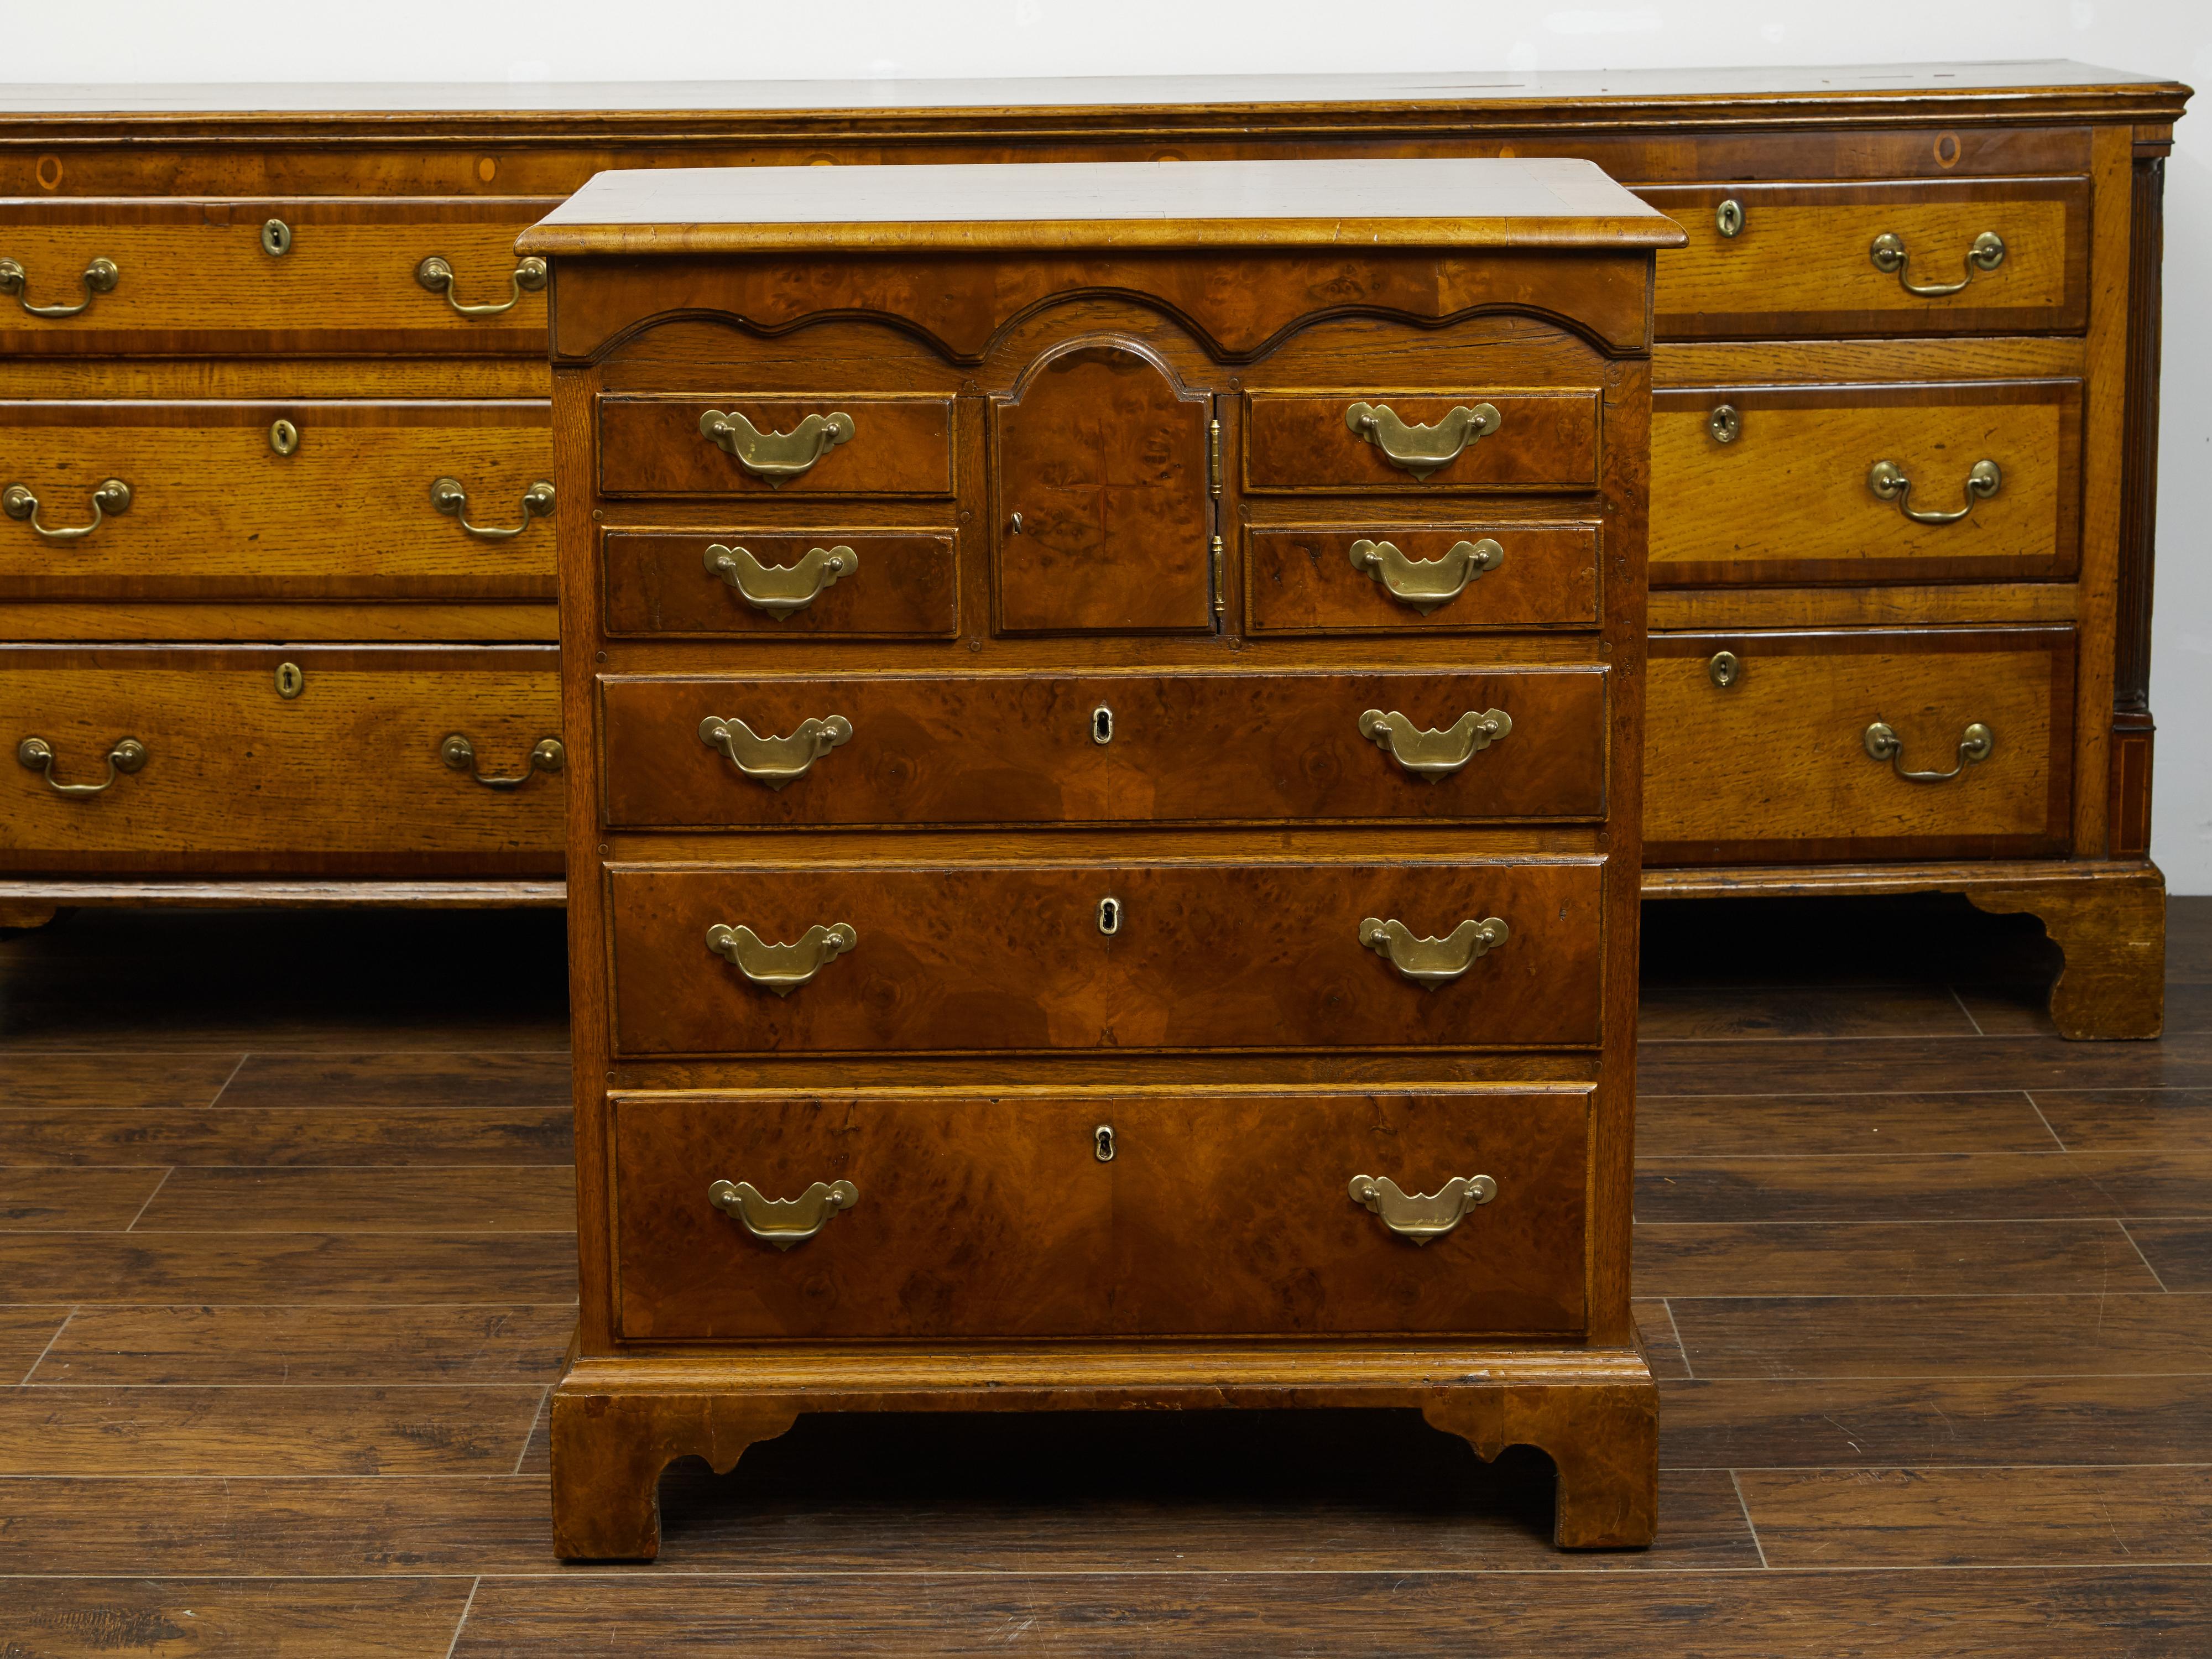 An English walnut commode from the 19th century, with graduating drawers and petite door. Created in England during the 19th century, this walnut commode features a rectangular top with quarter veneer, sitting above a perfectly organized façade.